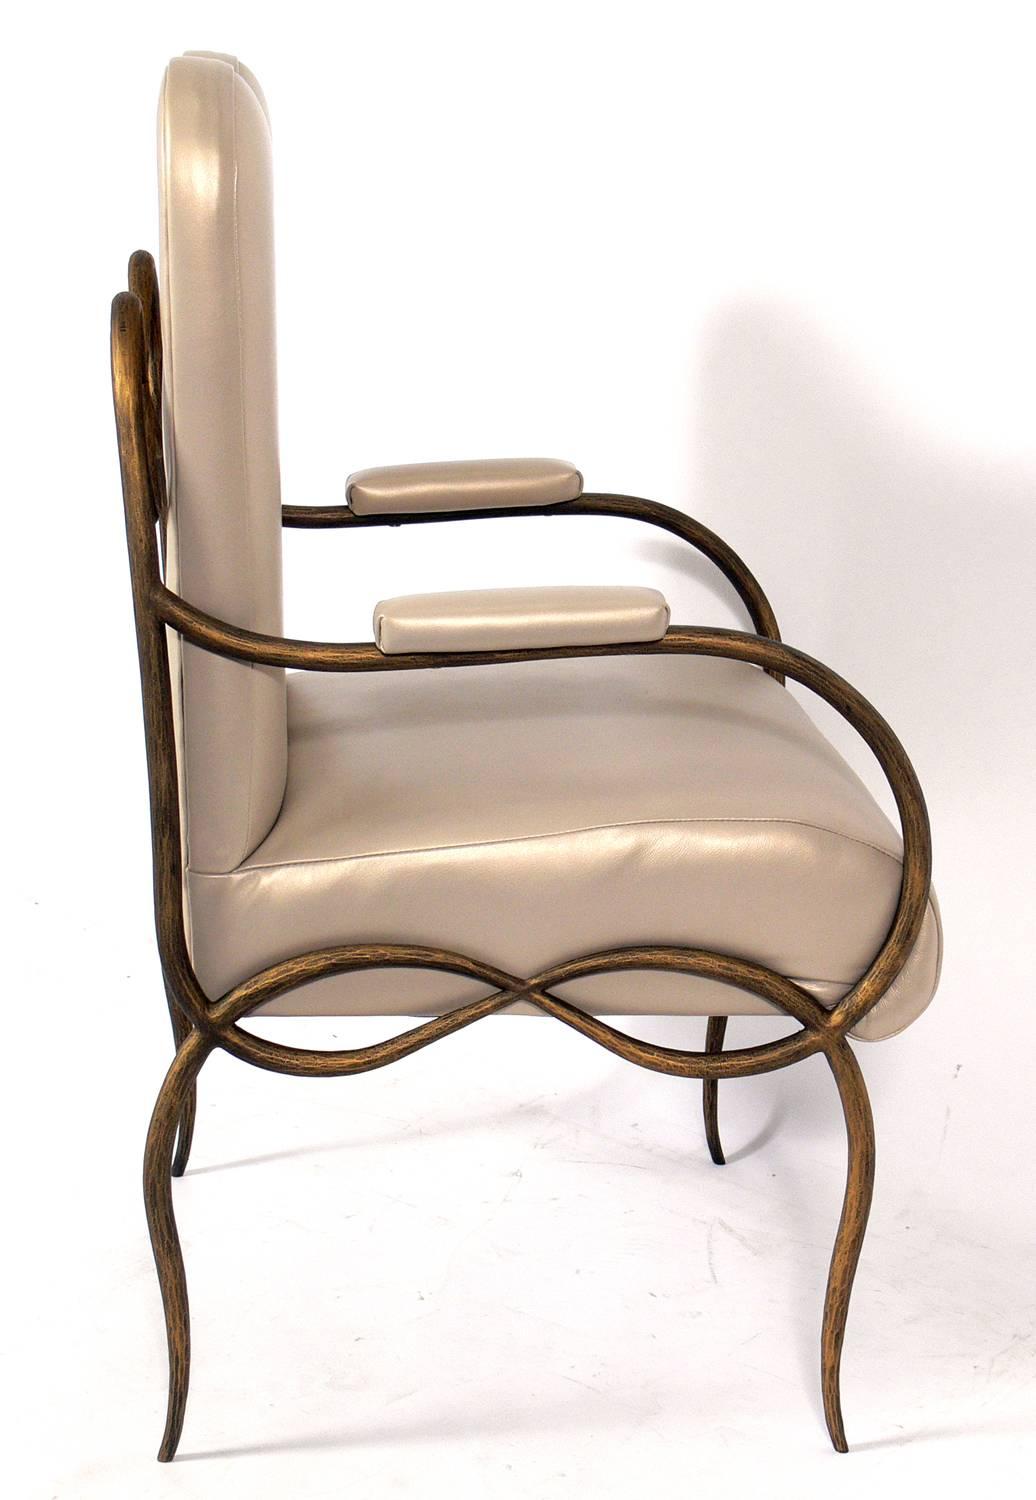 Gilt iron and leather chair after René Drouet, French, circa 2000s. It has been upholstered in a pearlescent leather.